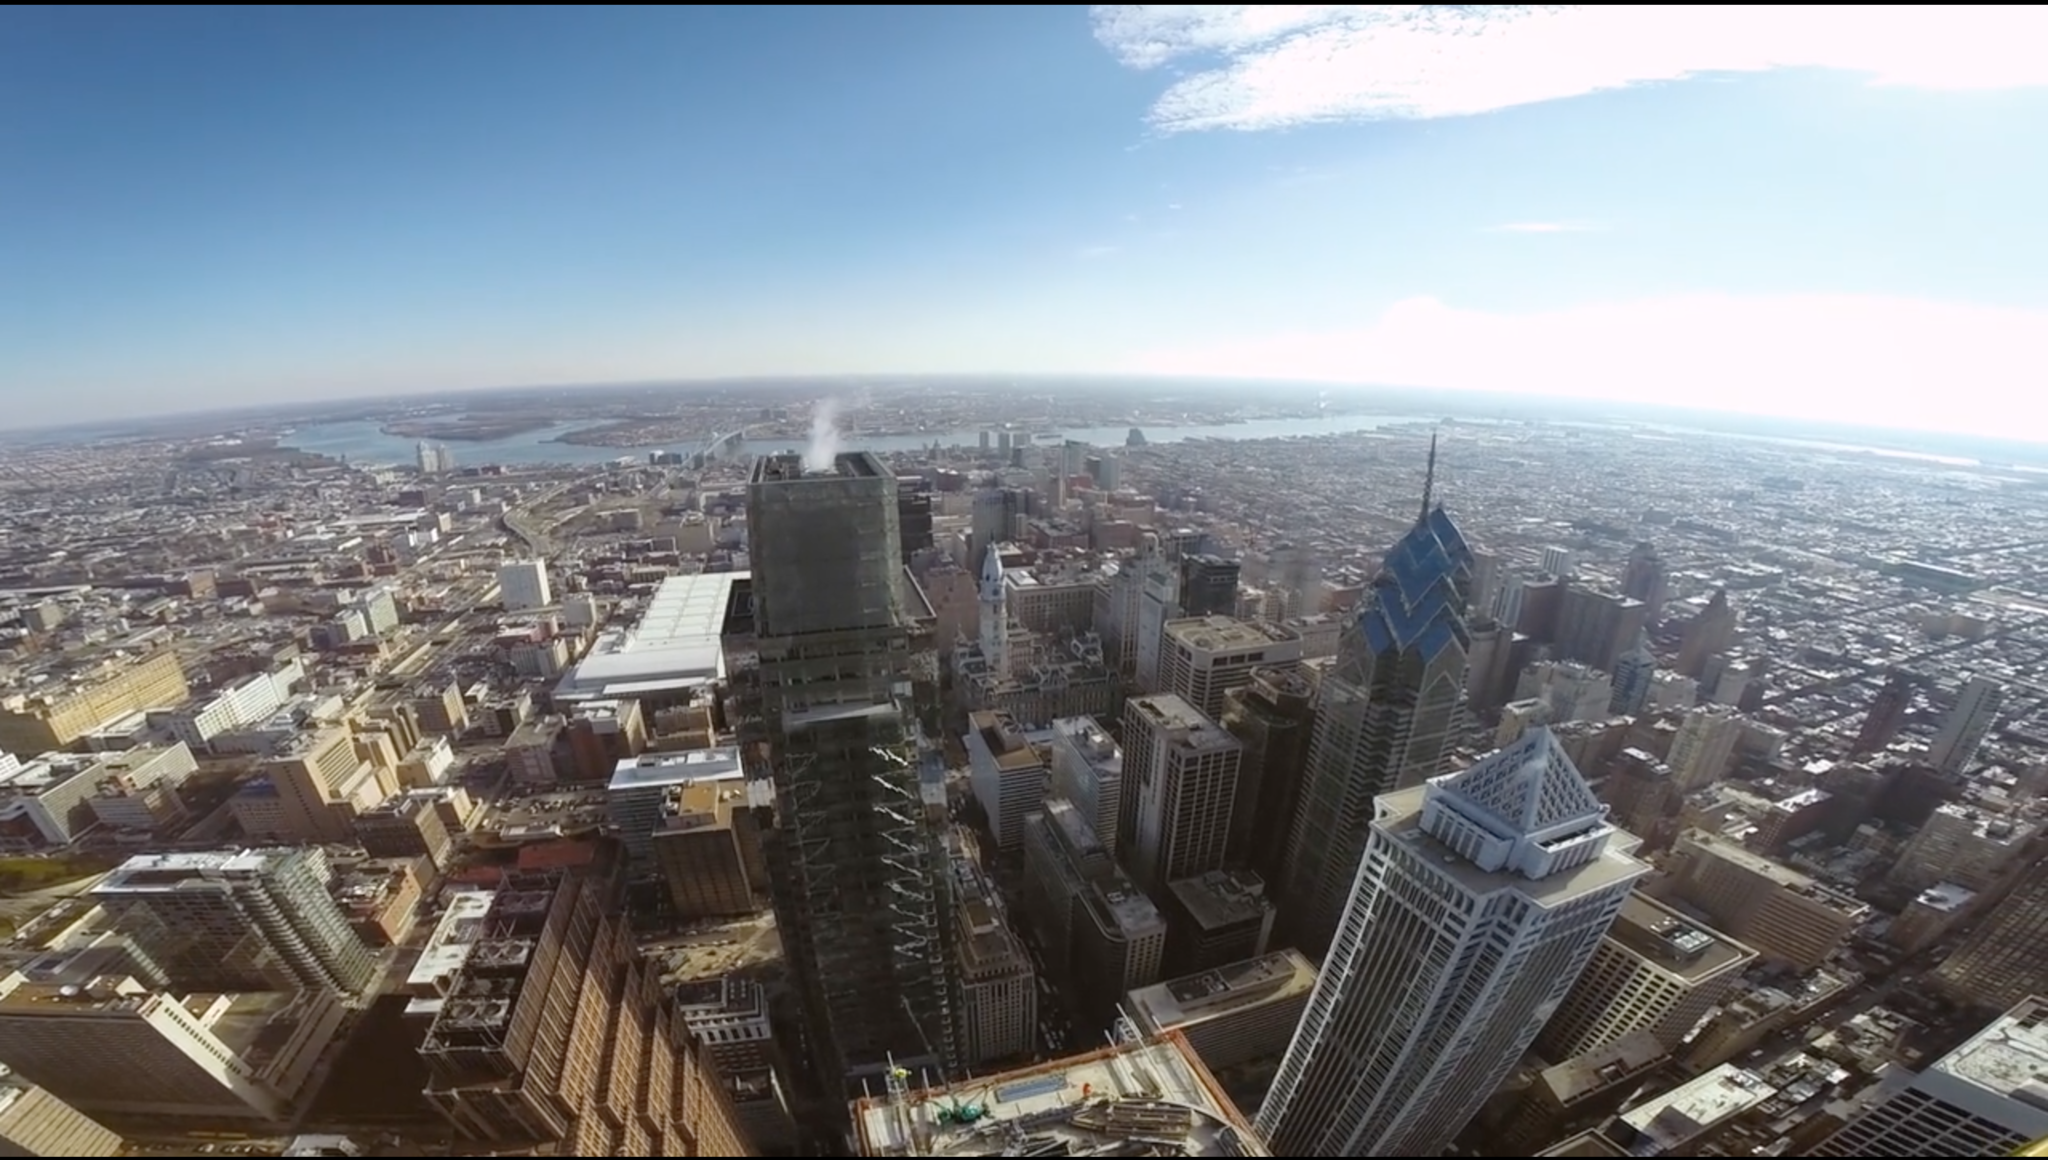 This is the view from the tallest skyscraper in Pa. | PennLive.com